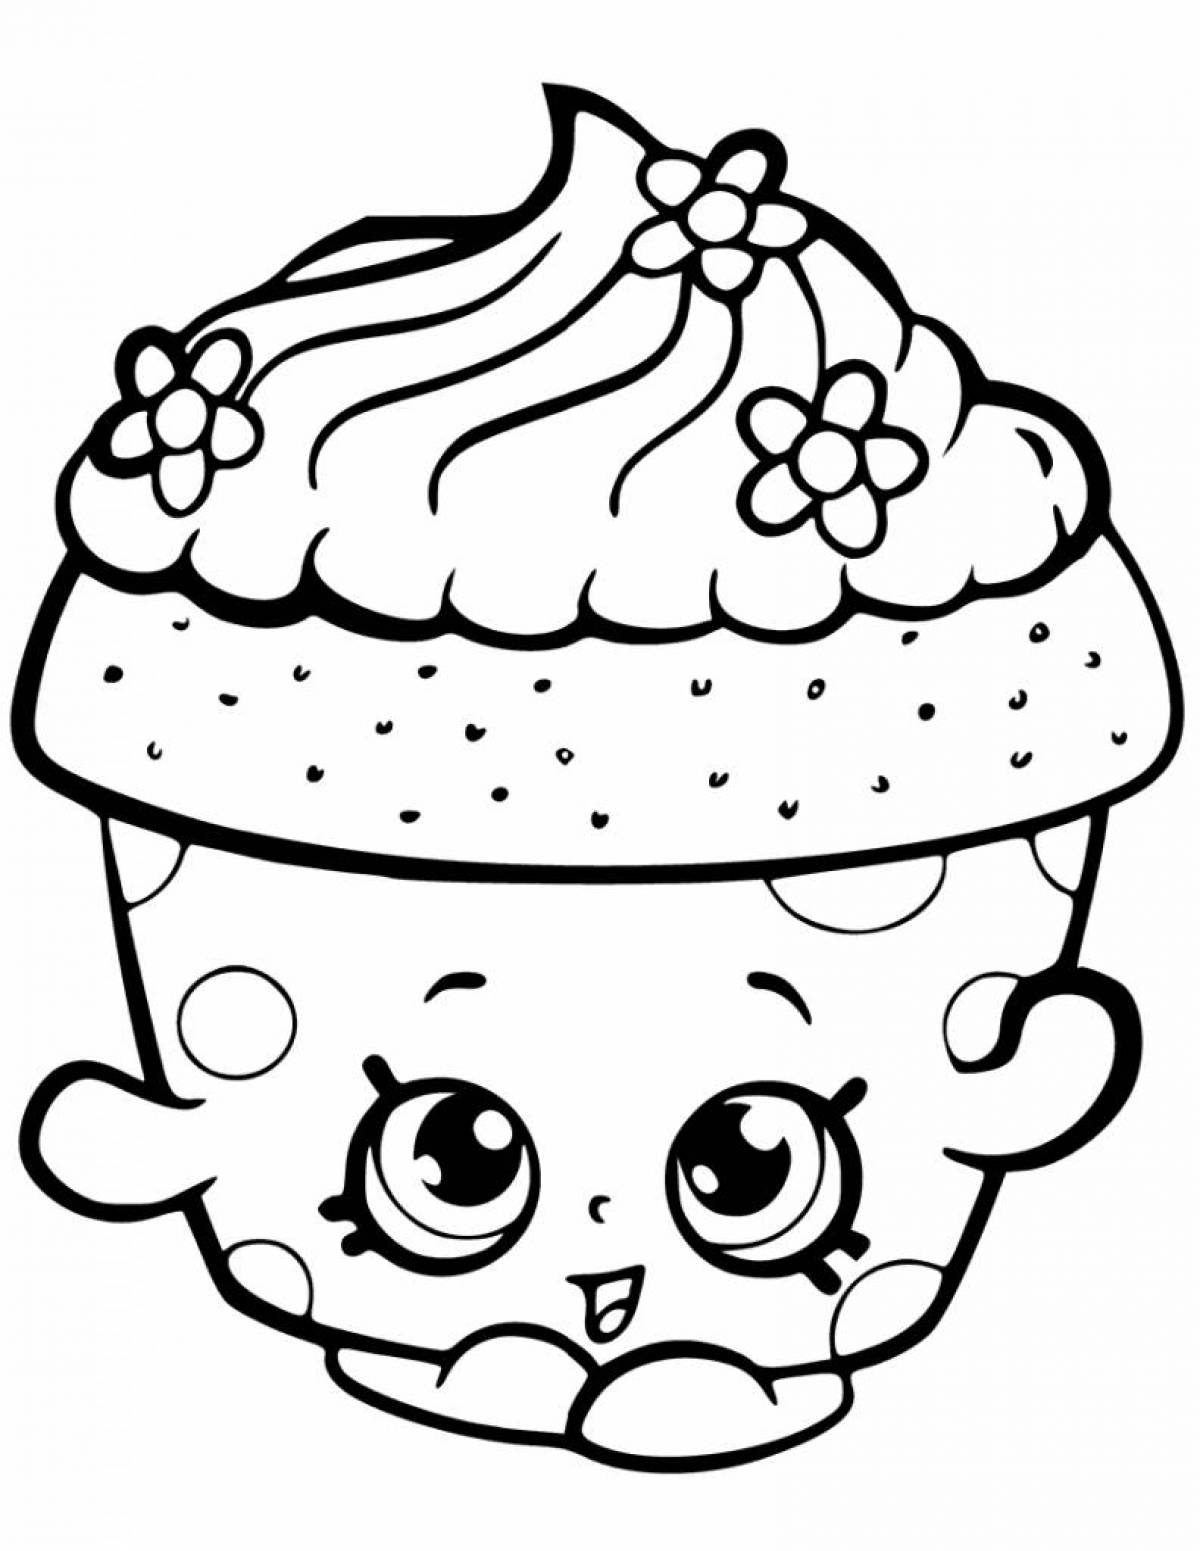 Sweet shopkins coloring page